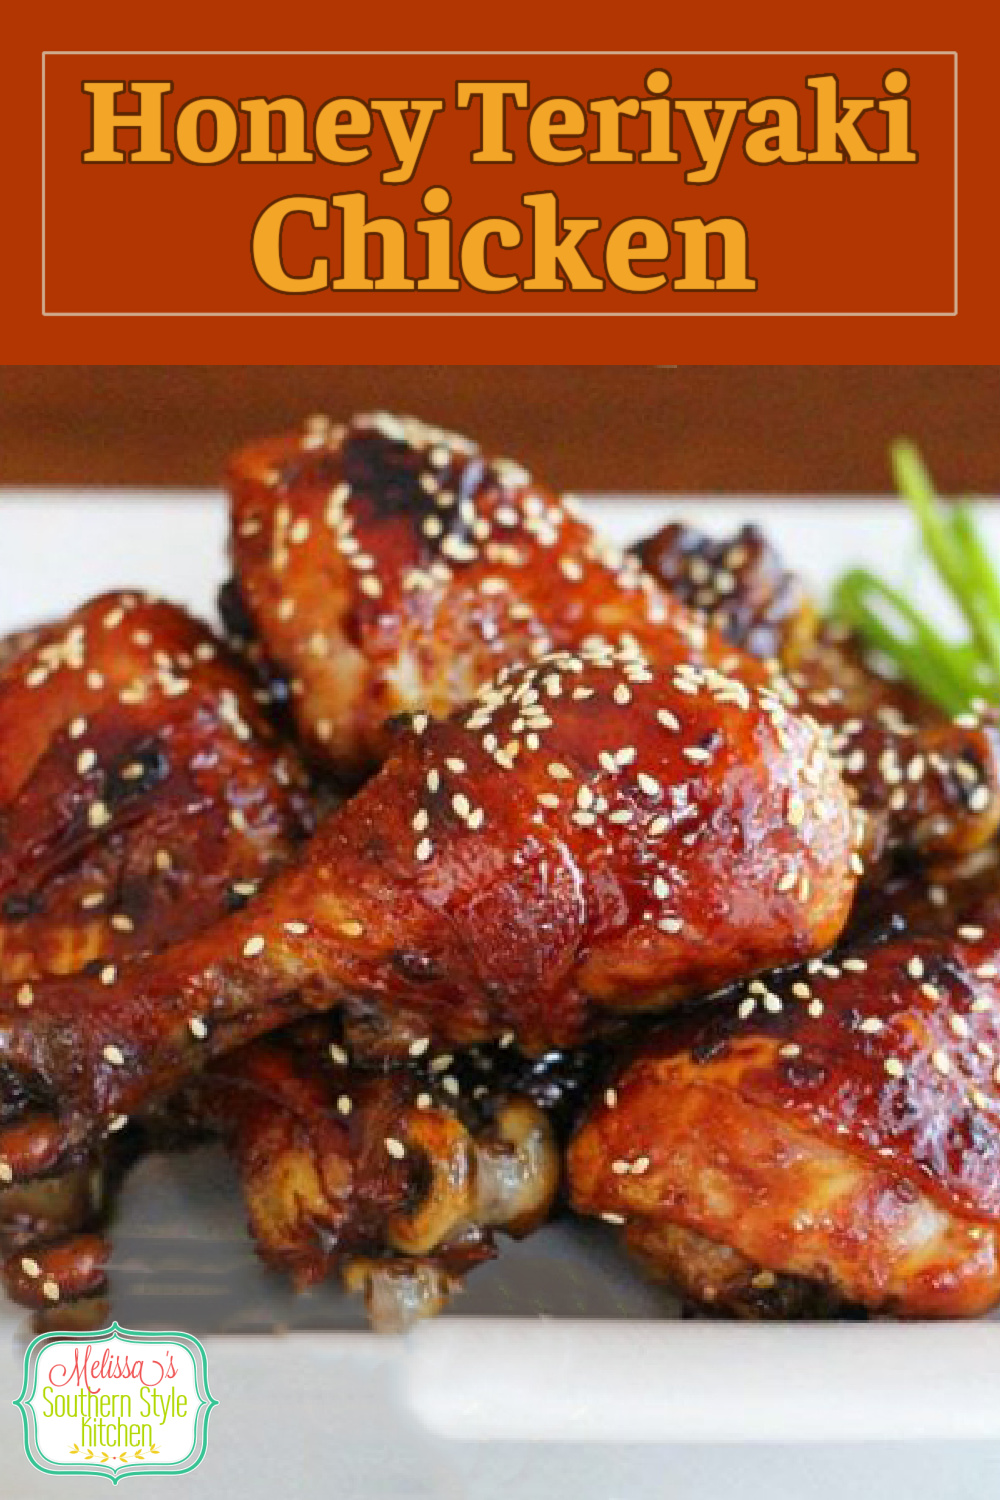 This sweet and spicy Asian inspired chicken melts in your mouth! #honeyteriyakichicken #teriyakichicken #easychickenrecipes #teriyakichicken #asianinspired #chicken #teriyakisauce #30minutemeals #dinner #dinnerideas #southernrecipes #southernfood via @melissasssk